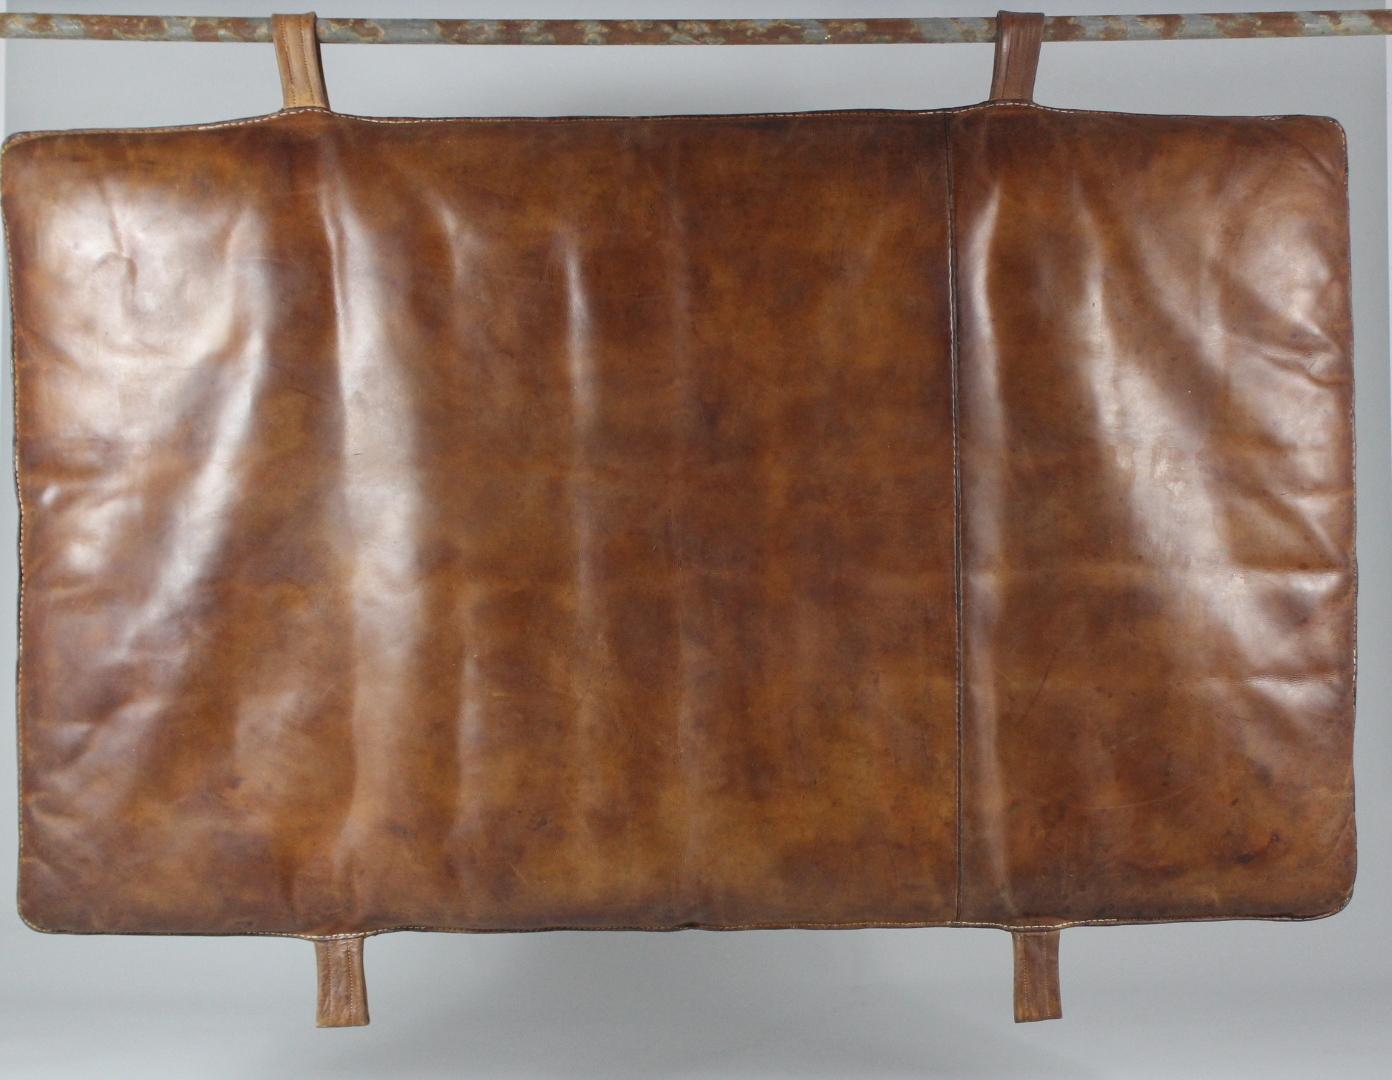 Leather gym mat from the 1930s. The mat is made from a thick leather, nice patina. Very good original condition.